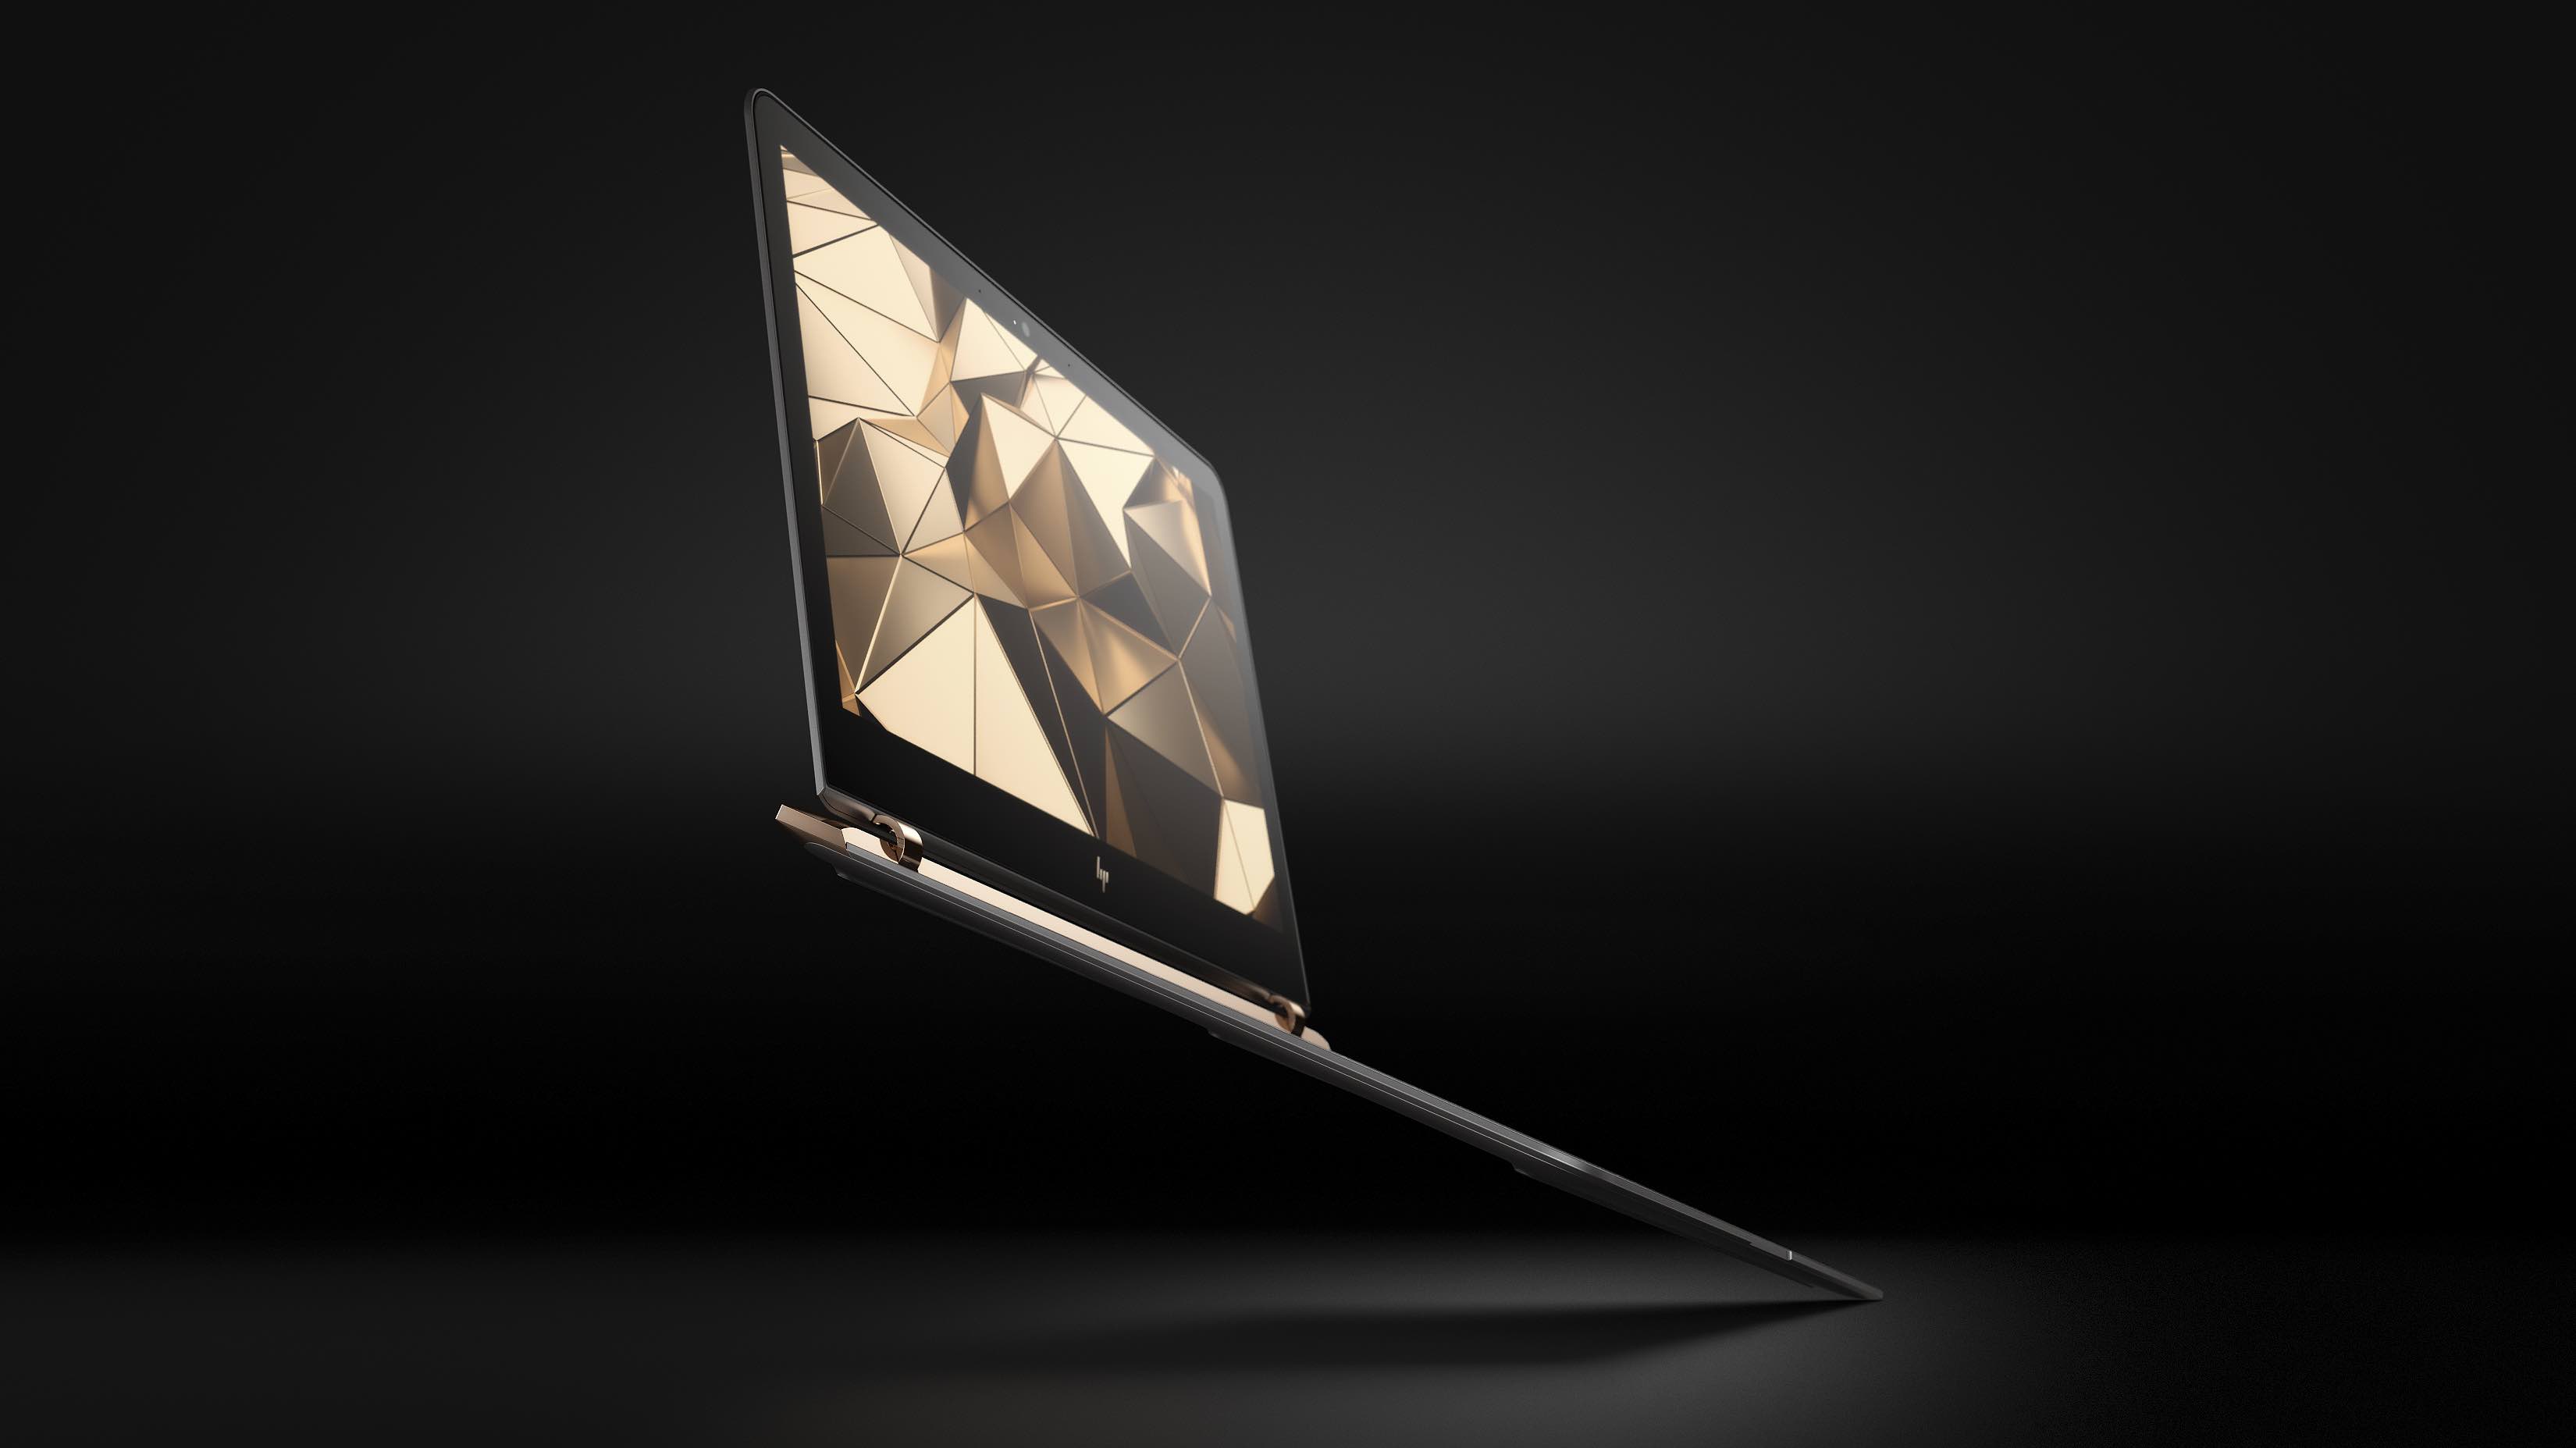 The HP Spectre - The World's thinnest notebook